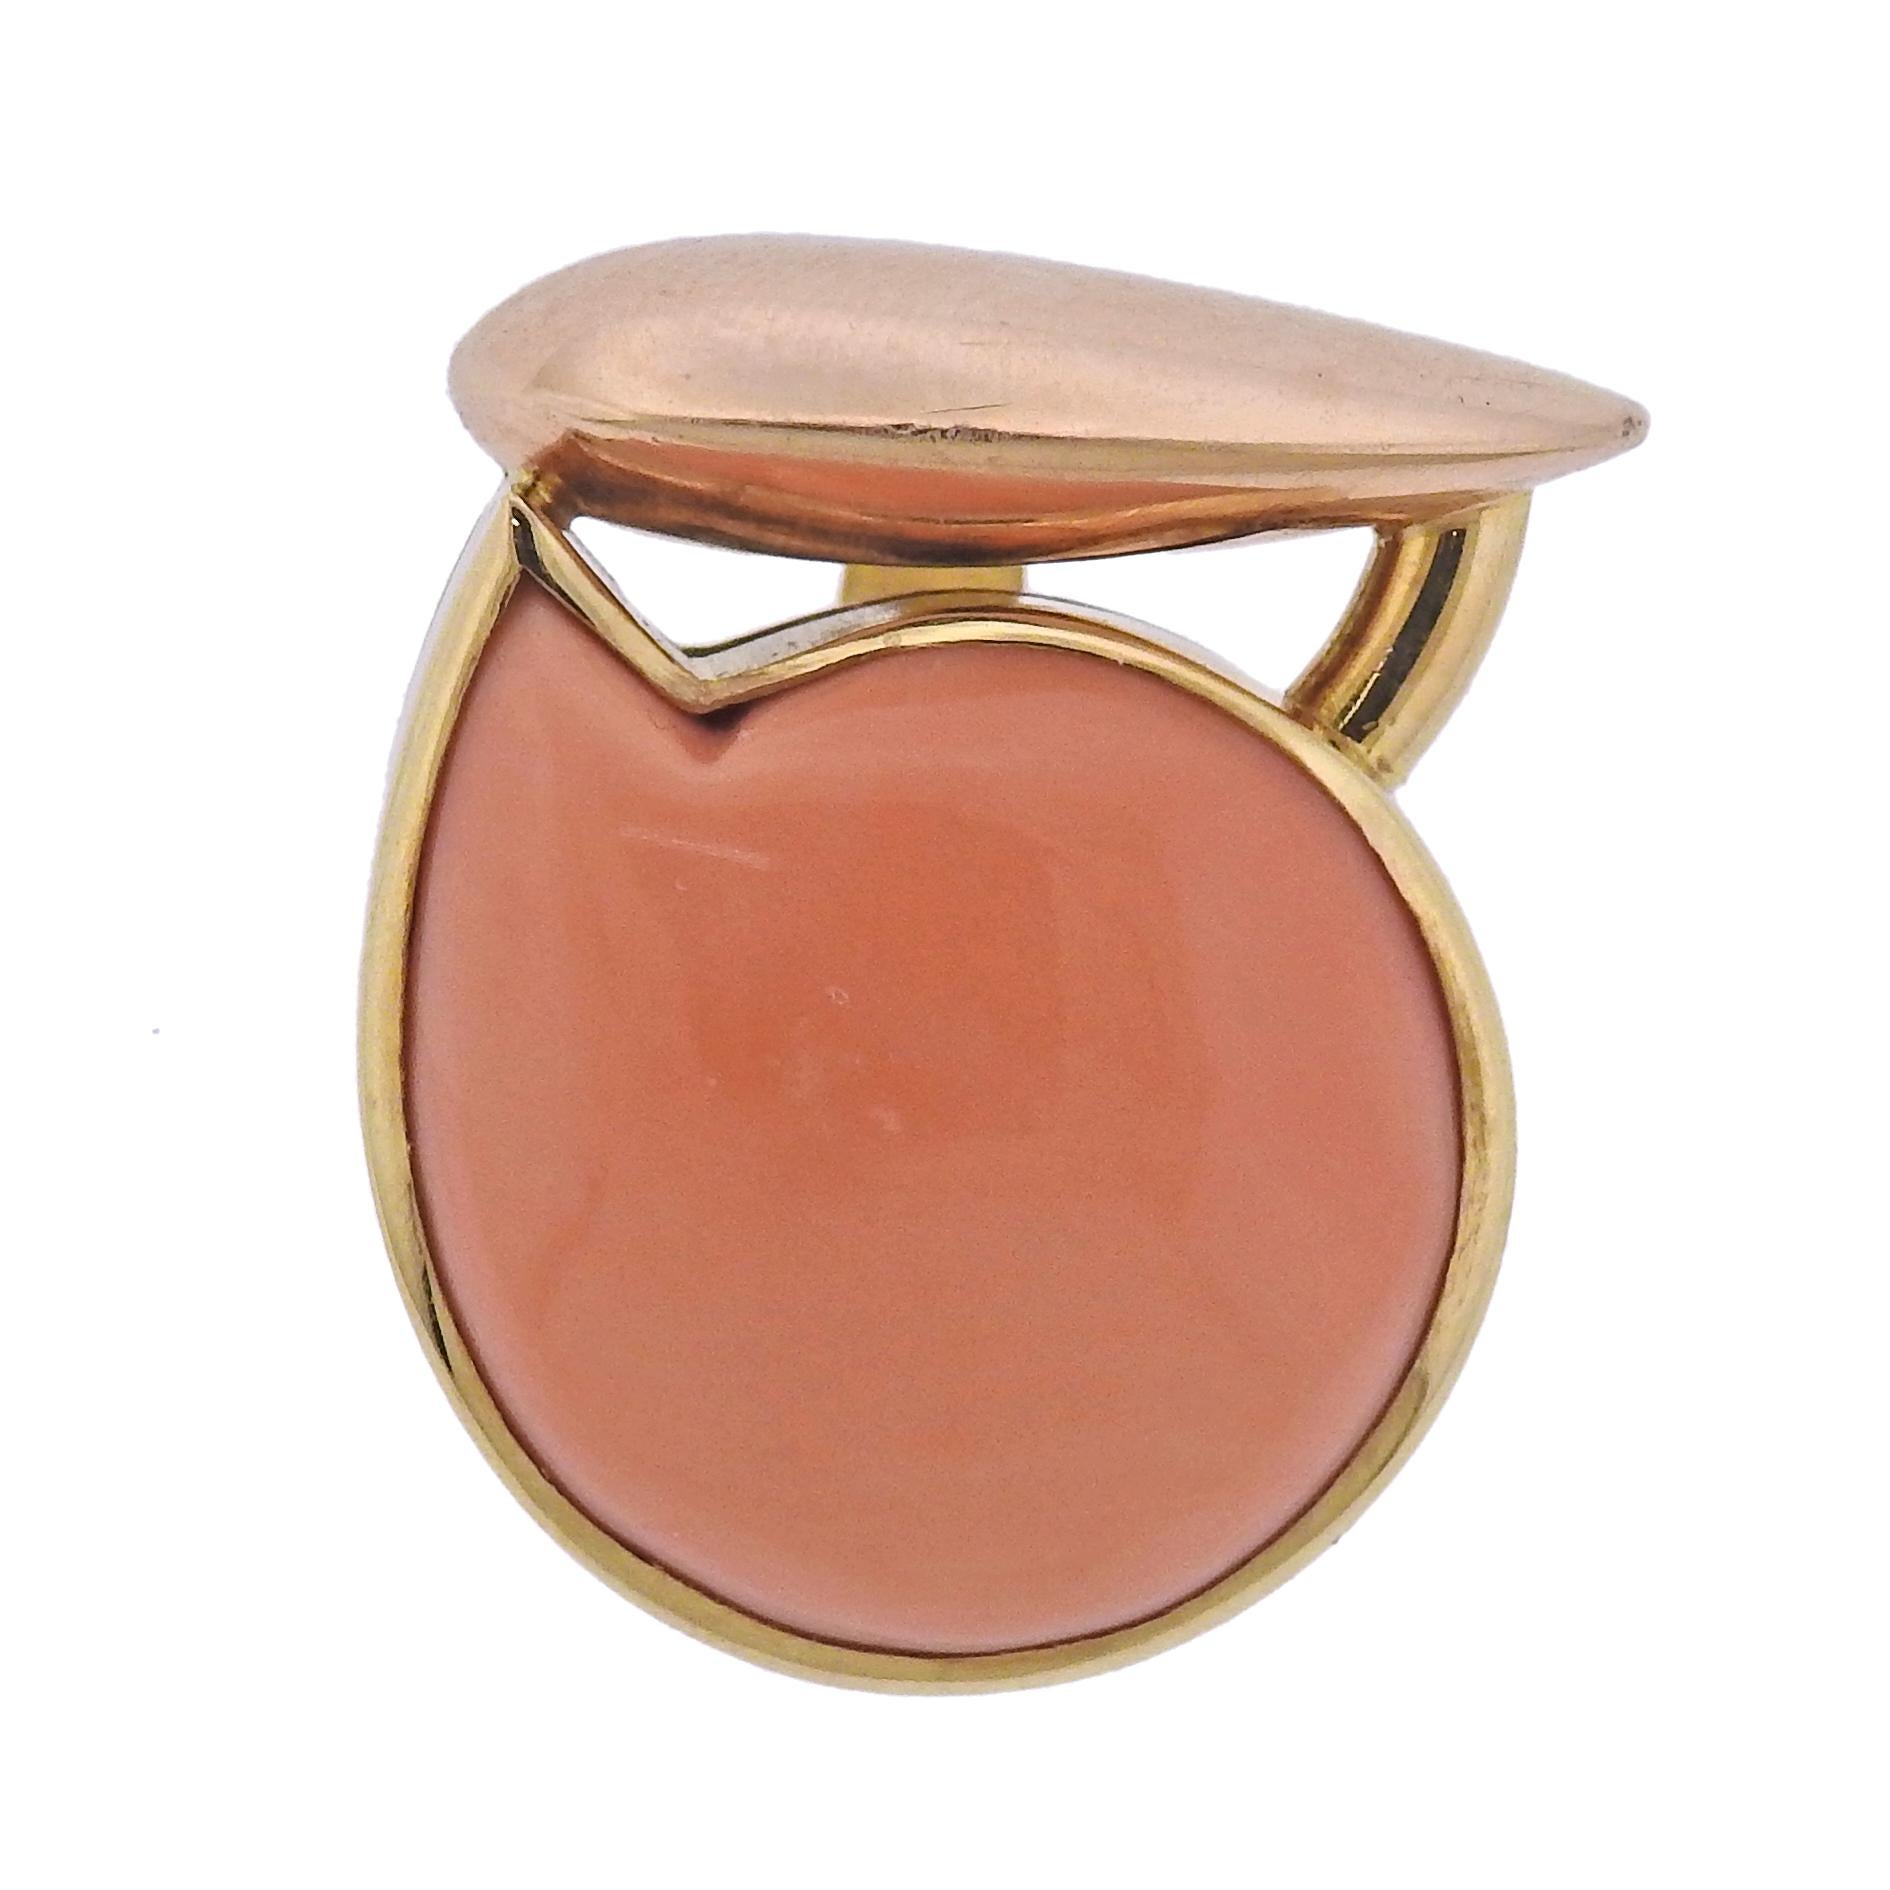 18k yellow gold pendant, crafted by Giorgio Facchini, set with coral gemstone in the center, Pendant measures 31mm x 25mm (pictured necklace is not included). Marked with Facchini signature, 750. Weight of the piece - 17.2 grams 